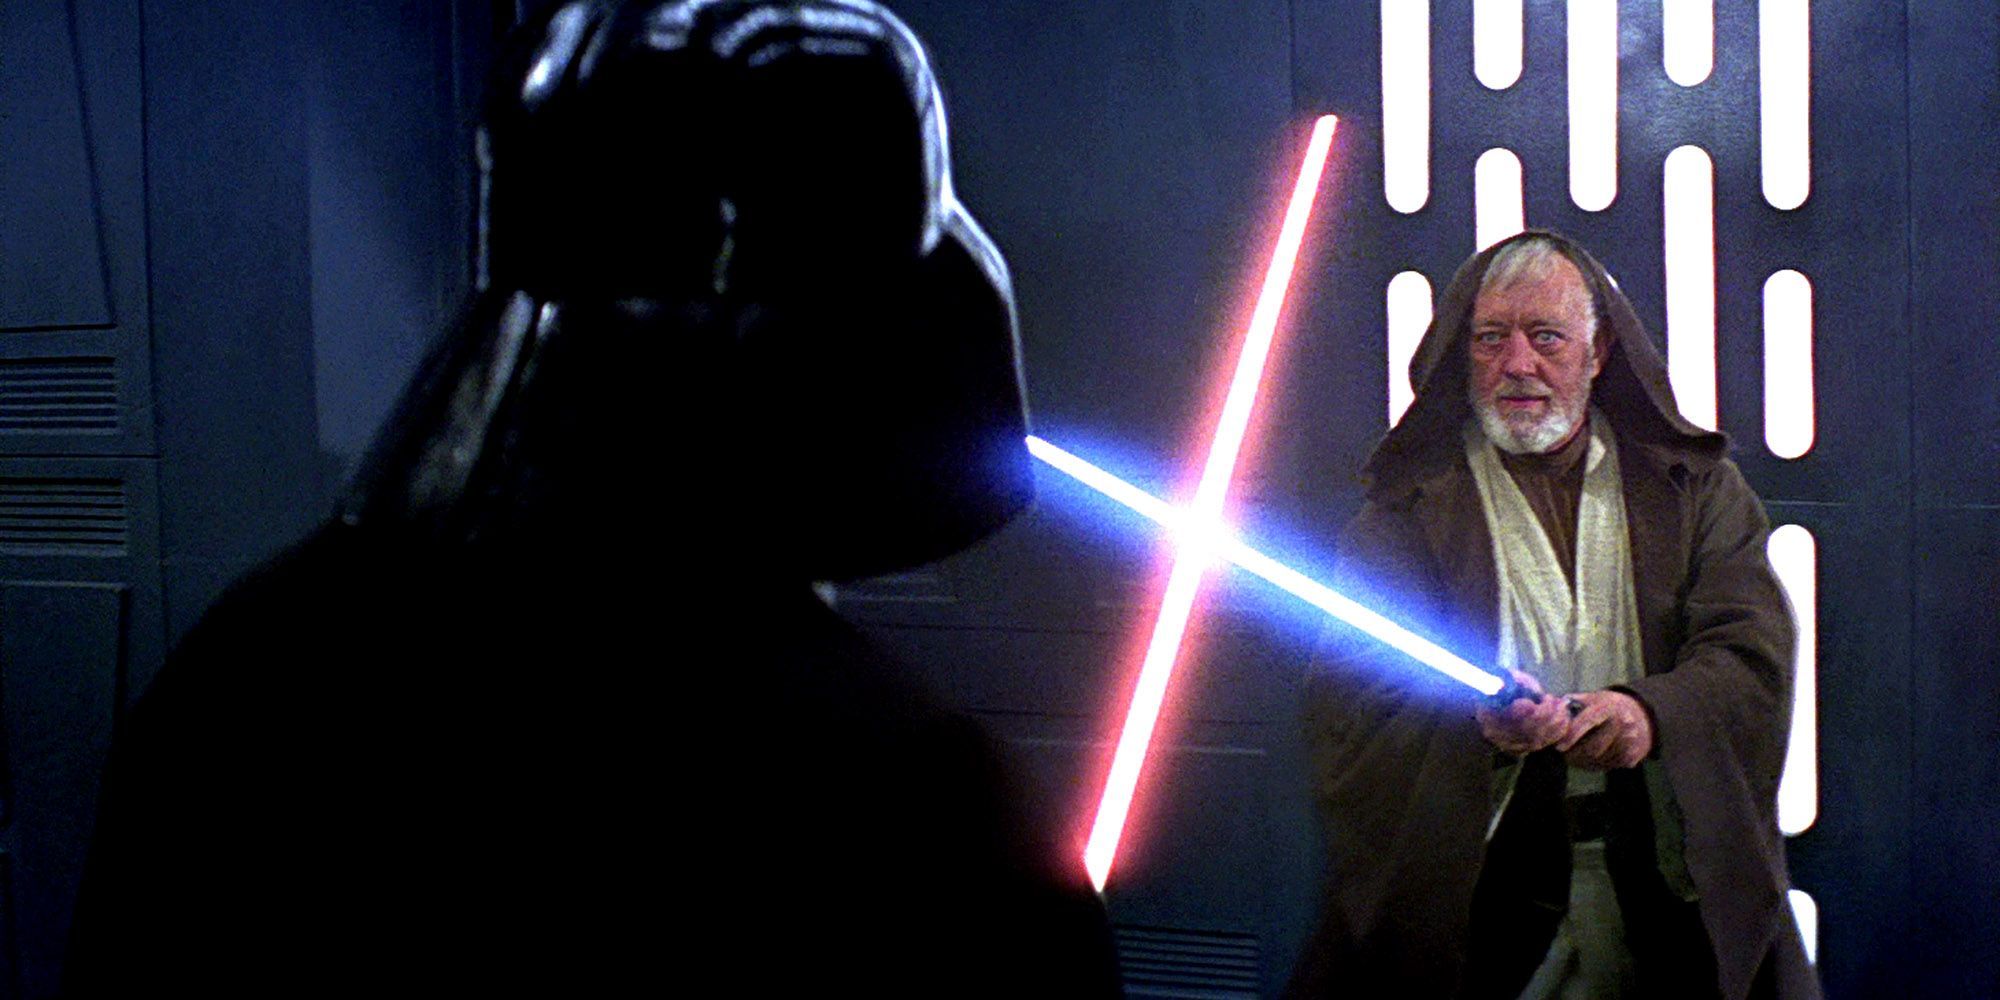 obi-wan fights darth vader in a new hope